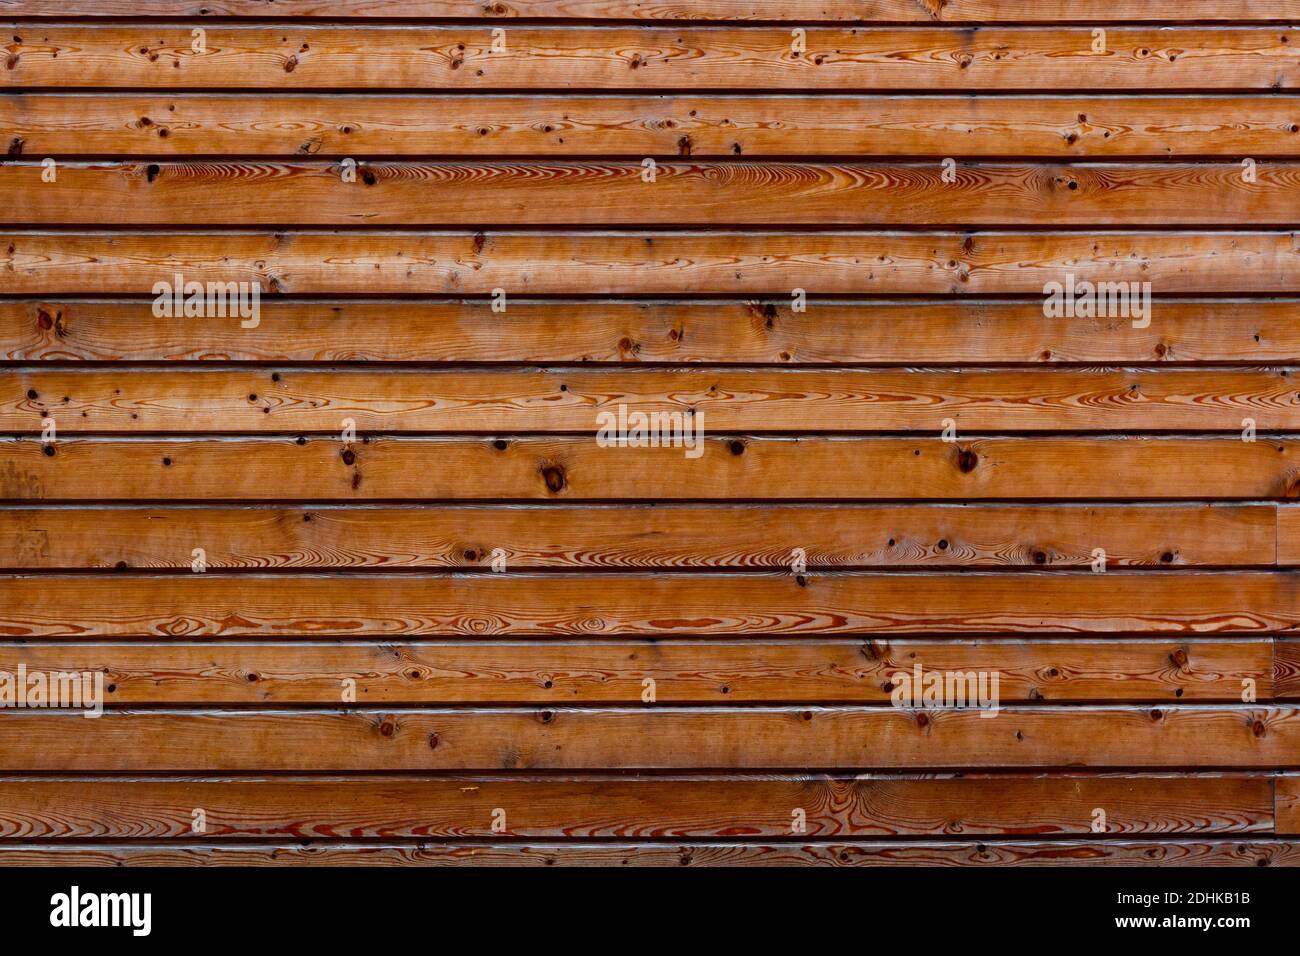 wall from wooden horizontally arranged boards natural wood pine Stock Photo